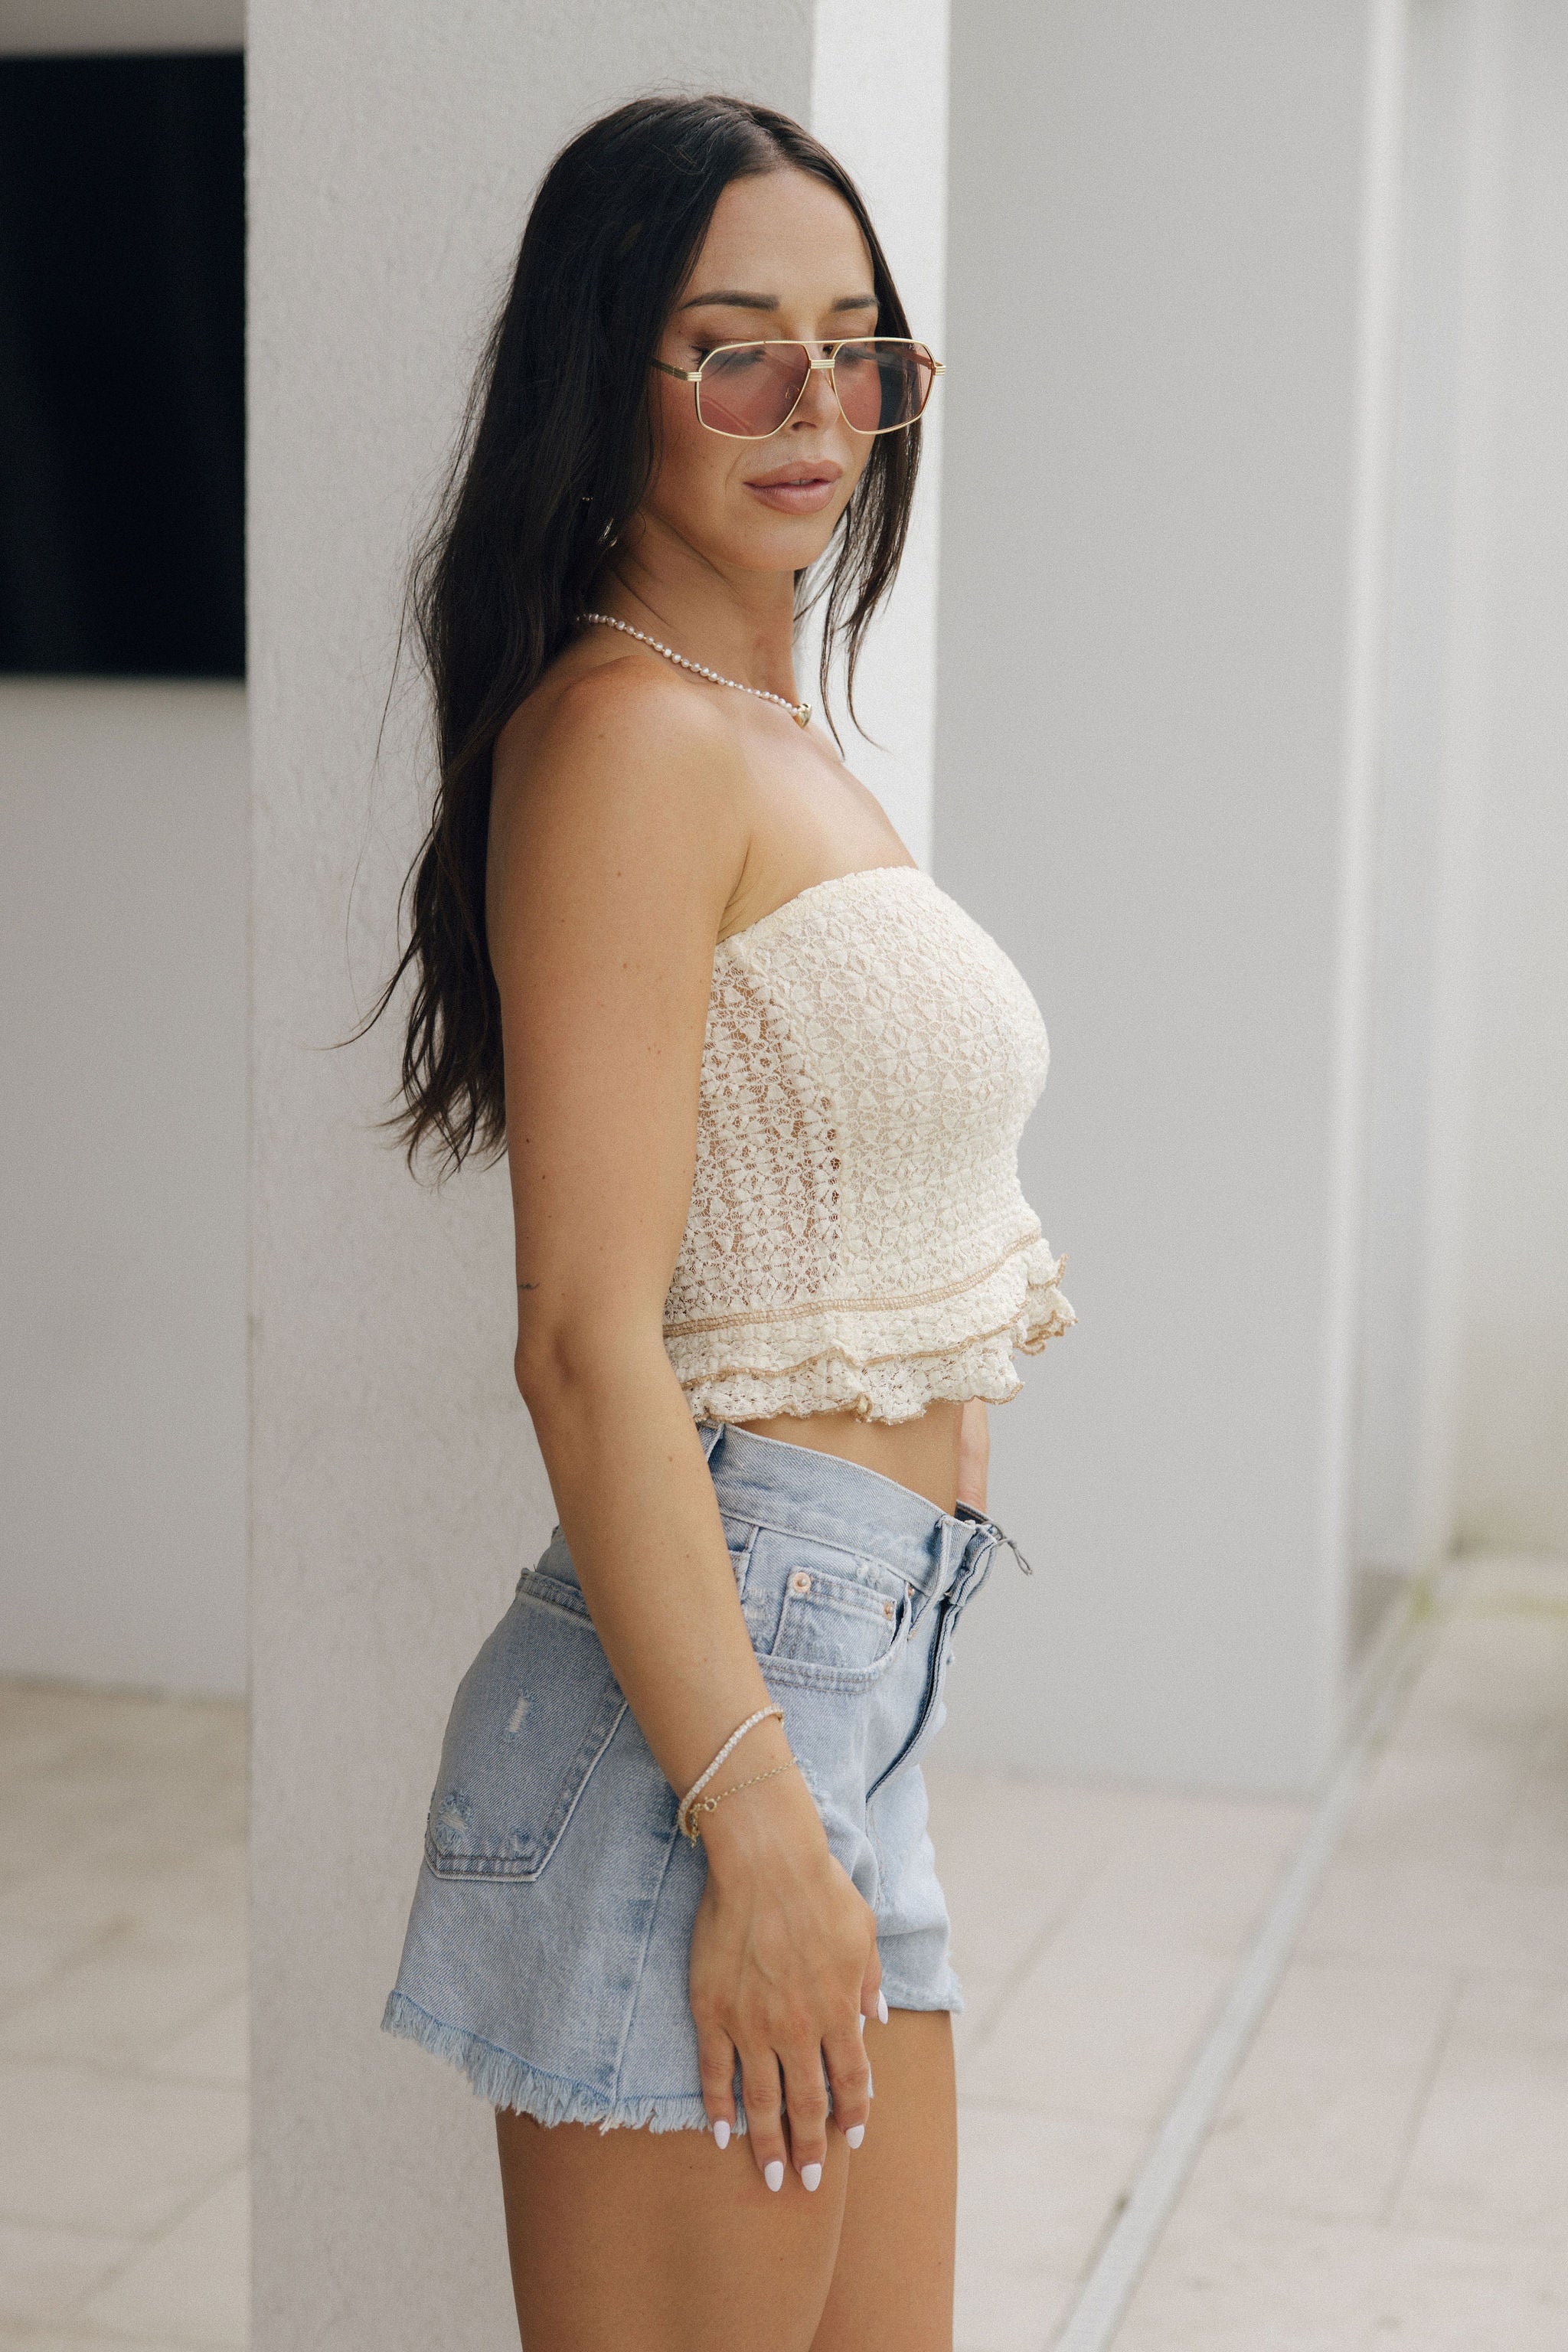 Upper body side view of model wearing the Adley Light Wash Frayed Denim Shorts that have light wash denim, pockets, a frayed hem, and light distressing. Worn with tube top.